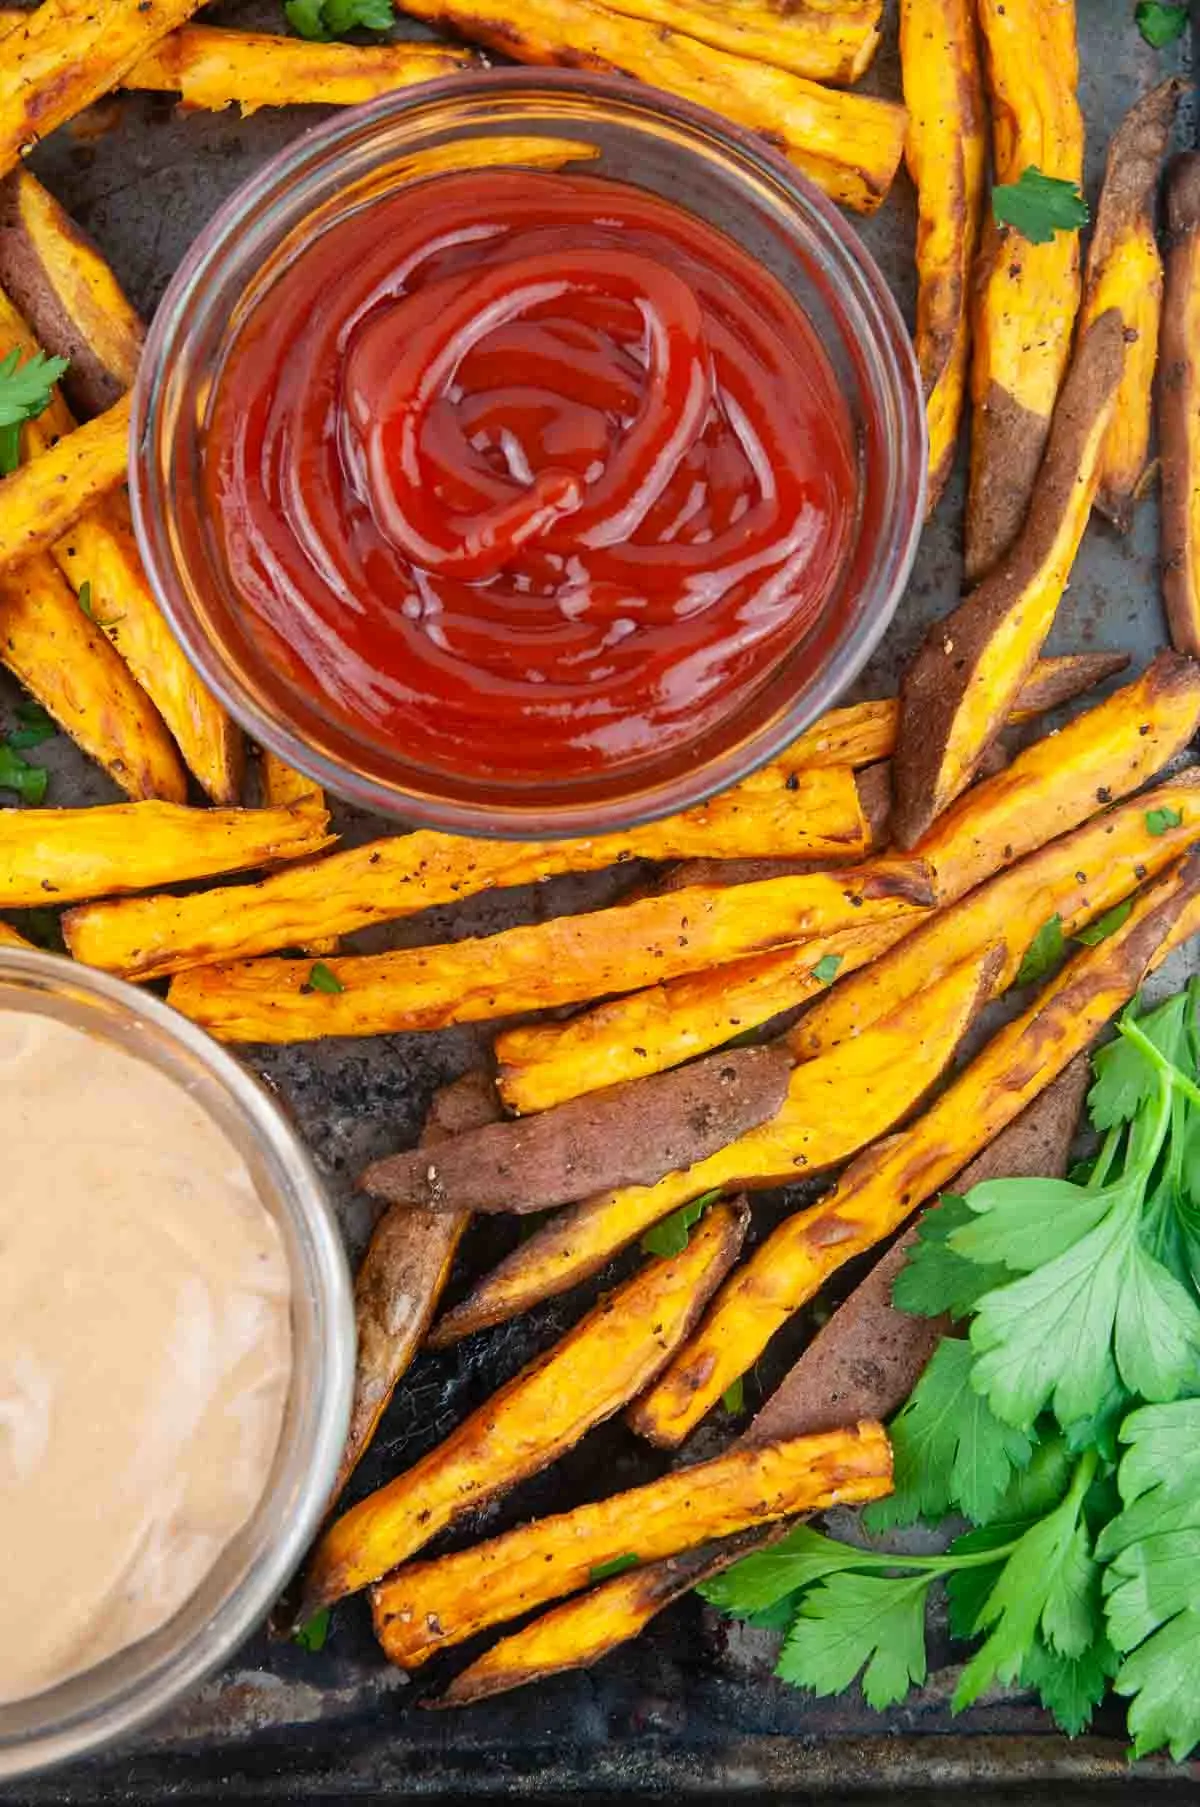 Easy sweet potato fries are the perfect thing to dunk into ketchup.